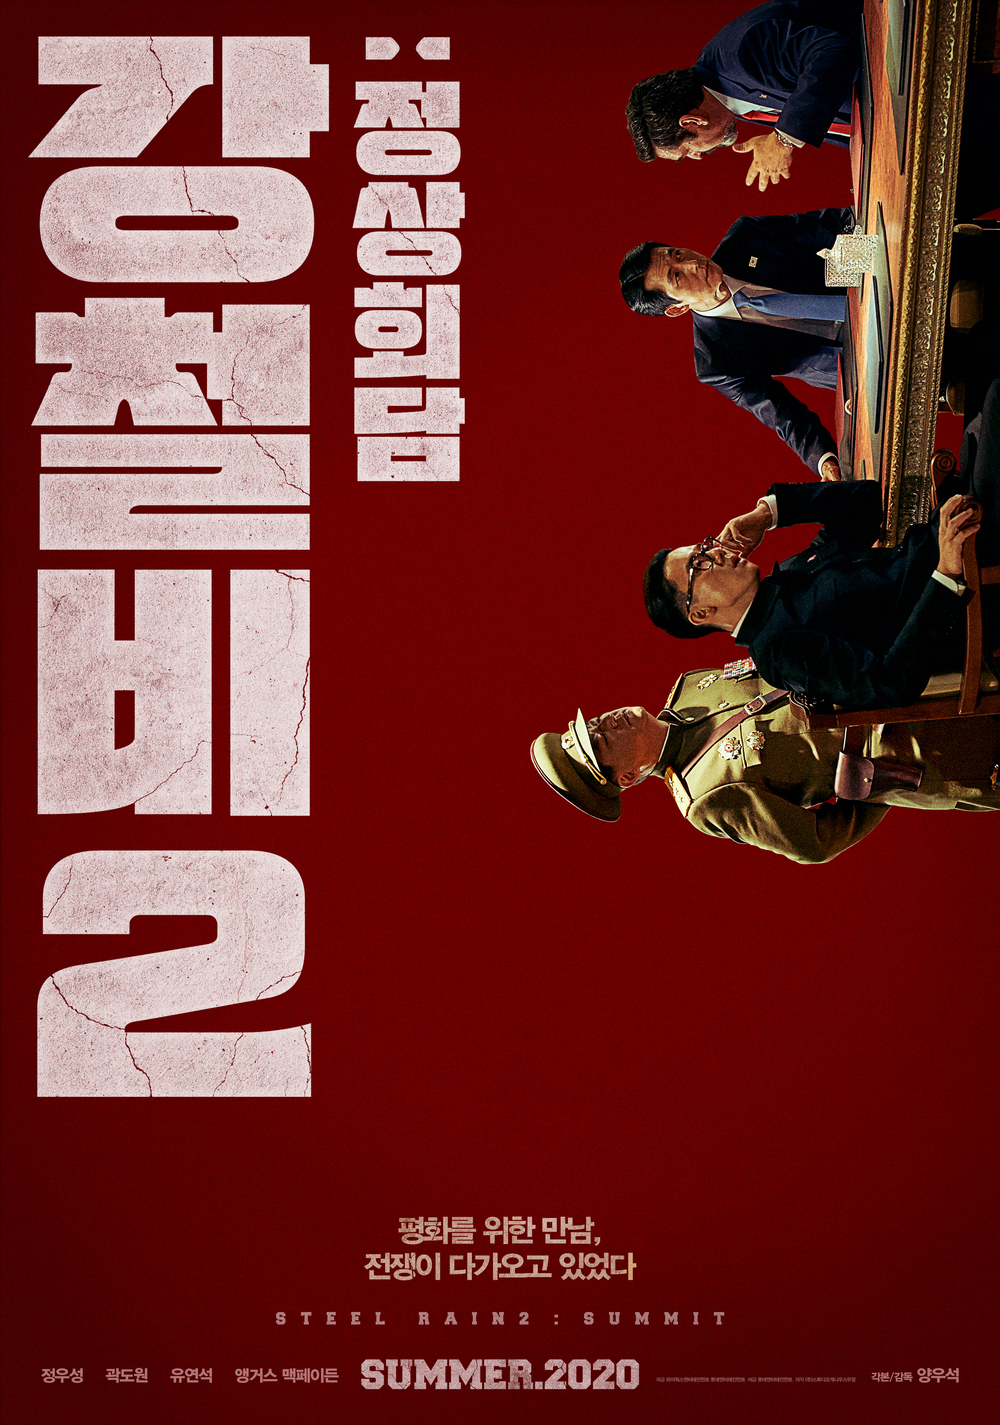 The series of North Korea provocations put the film Steel Rain2: Summit at the center of the topic.Director Woo-seok Yang responded to the title of Steel Rain2: Summit, which represents the complementary sequel to his previous work Steel Rain.Steel Rain: Summit (director Woo-seok Yang), which opens this summer, is a painting of the Danger situation just before the war that takes place after three leaders were kidnapped by North Korean nuclear submarines in a coup détat in North and South America during the Summit.We share the problem of the way to the peace system of the previous work Steel Rain and Korean Peninsula, and the starting point of the war Danger is the same as the occurrence of the situation in North Korea.However, unlike the usual sequels that lead to the previous and the story, it can be called Steel Rain in that it presents a solution to the peace system of Korean Peninsula in the middle of the deepening US-China conflict as China emerged as a hegemony state.If Steel Rain showed a new route to peace through steel chemistry between the Blue House Diplomatic Security Chief and the Special Agent of the North, starting with the Norths top leader at the crossroads of life and death, After the North Korea coup and the three leaders were kidnapped by the North Korea nuclear submarine, they draw the situation of Danger just before the war in Northeast Asia.Woo-seok Yang said, If Steel Rain was a change that started with the fantasy of What if the decision on the peace issue of Korean Peninsula was completely left in the hands of the South and the North?, Steel Rain2: Summit started in the reality of Korean Peninsula, I say, Im sorry.It is also an extension of this problem consciousness that Jung Woo-sung, who plays the role of President of the Republic of Korea and Kwak Do-won, who played the role of Diplomatic Security Chief of Steel Rain, changed Jinyoung and played the Chief Chief of the Norths coup.In other words, even if the parties of the two Koreas change Jinyoung and seek another solution, the fate of Korean Peninsula shows the reality that the South and the North can not decide alone.If Steel Rain started at the Kaesong Industrial Complex, which is a symbol of peace and coexistence between the two Koreas, and mainly traveled around the Korean Peninsula, Steel Rain2: Summit is off Dokdo, where the most dangerous strategic weapon on the planet, the most dangerous strategic weapon on the planet, It goes deep inside.pear hyo-ju